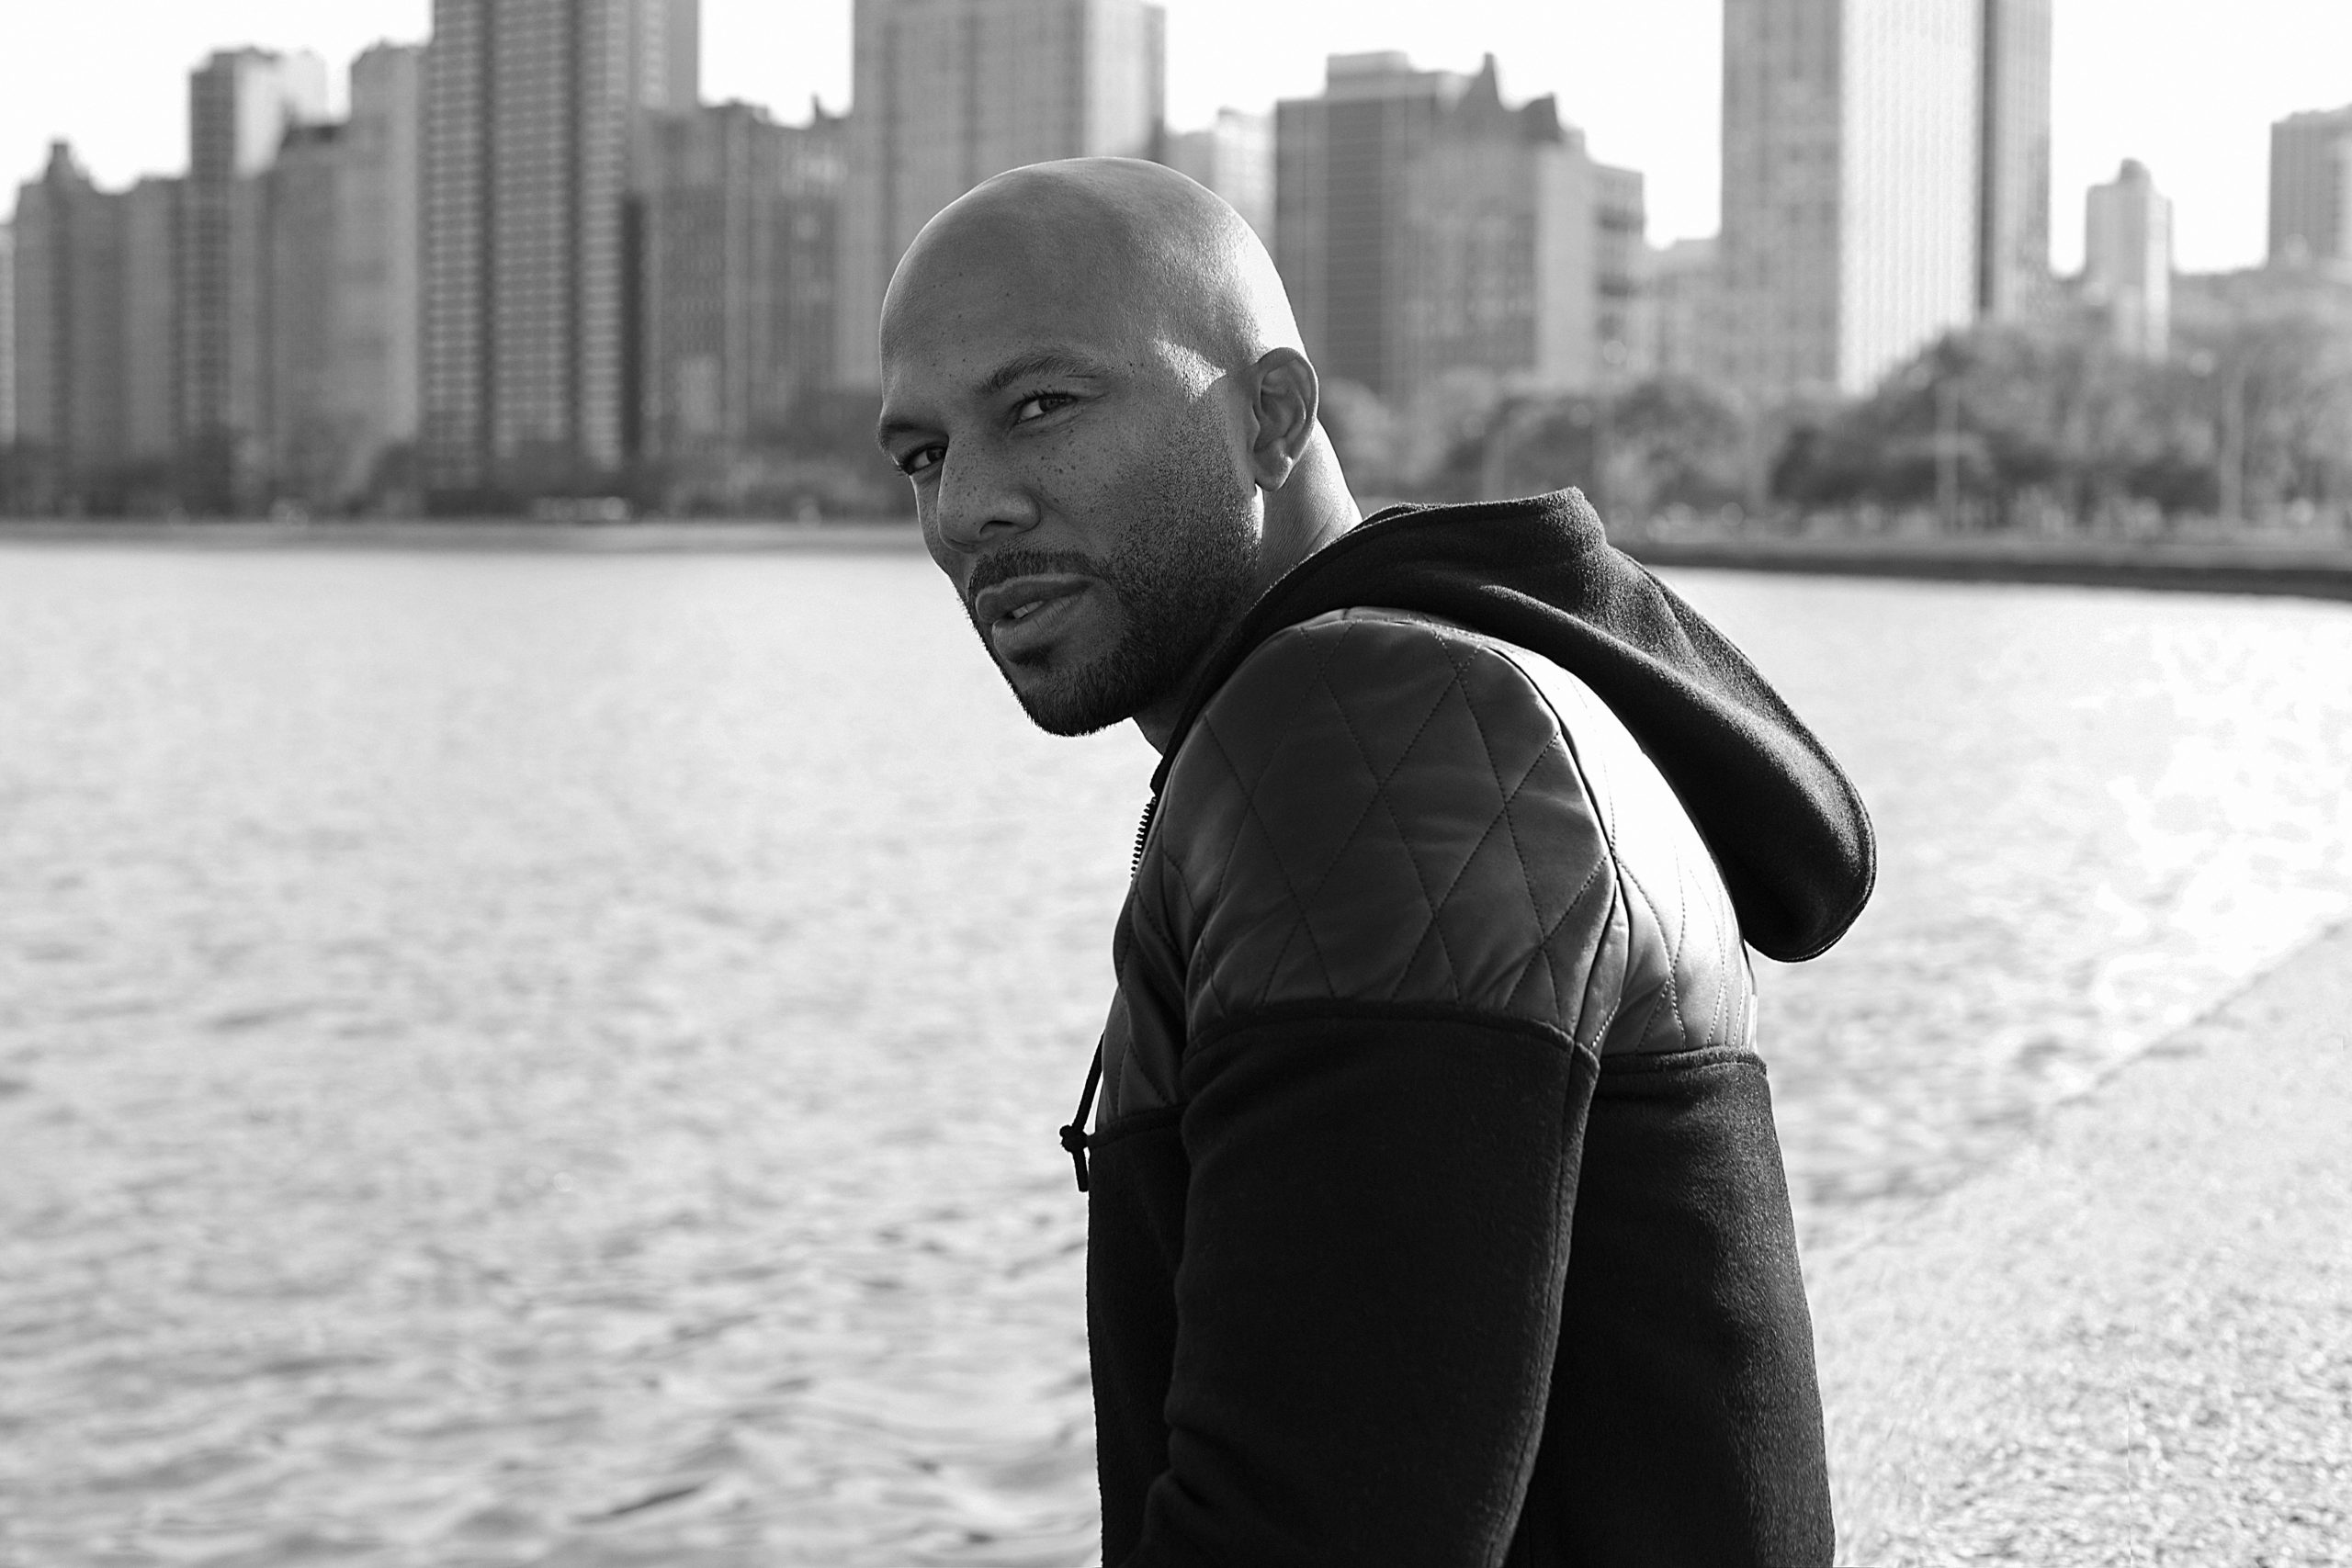 Rapper Common spoke at the University of St. Thomas on Oct. 5, 2018.